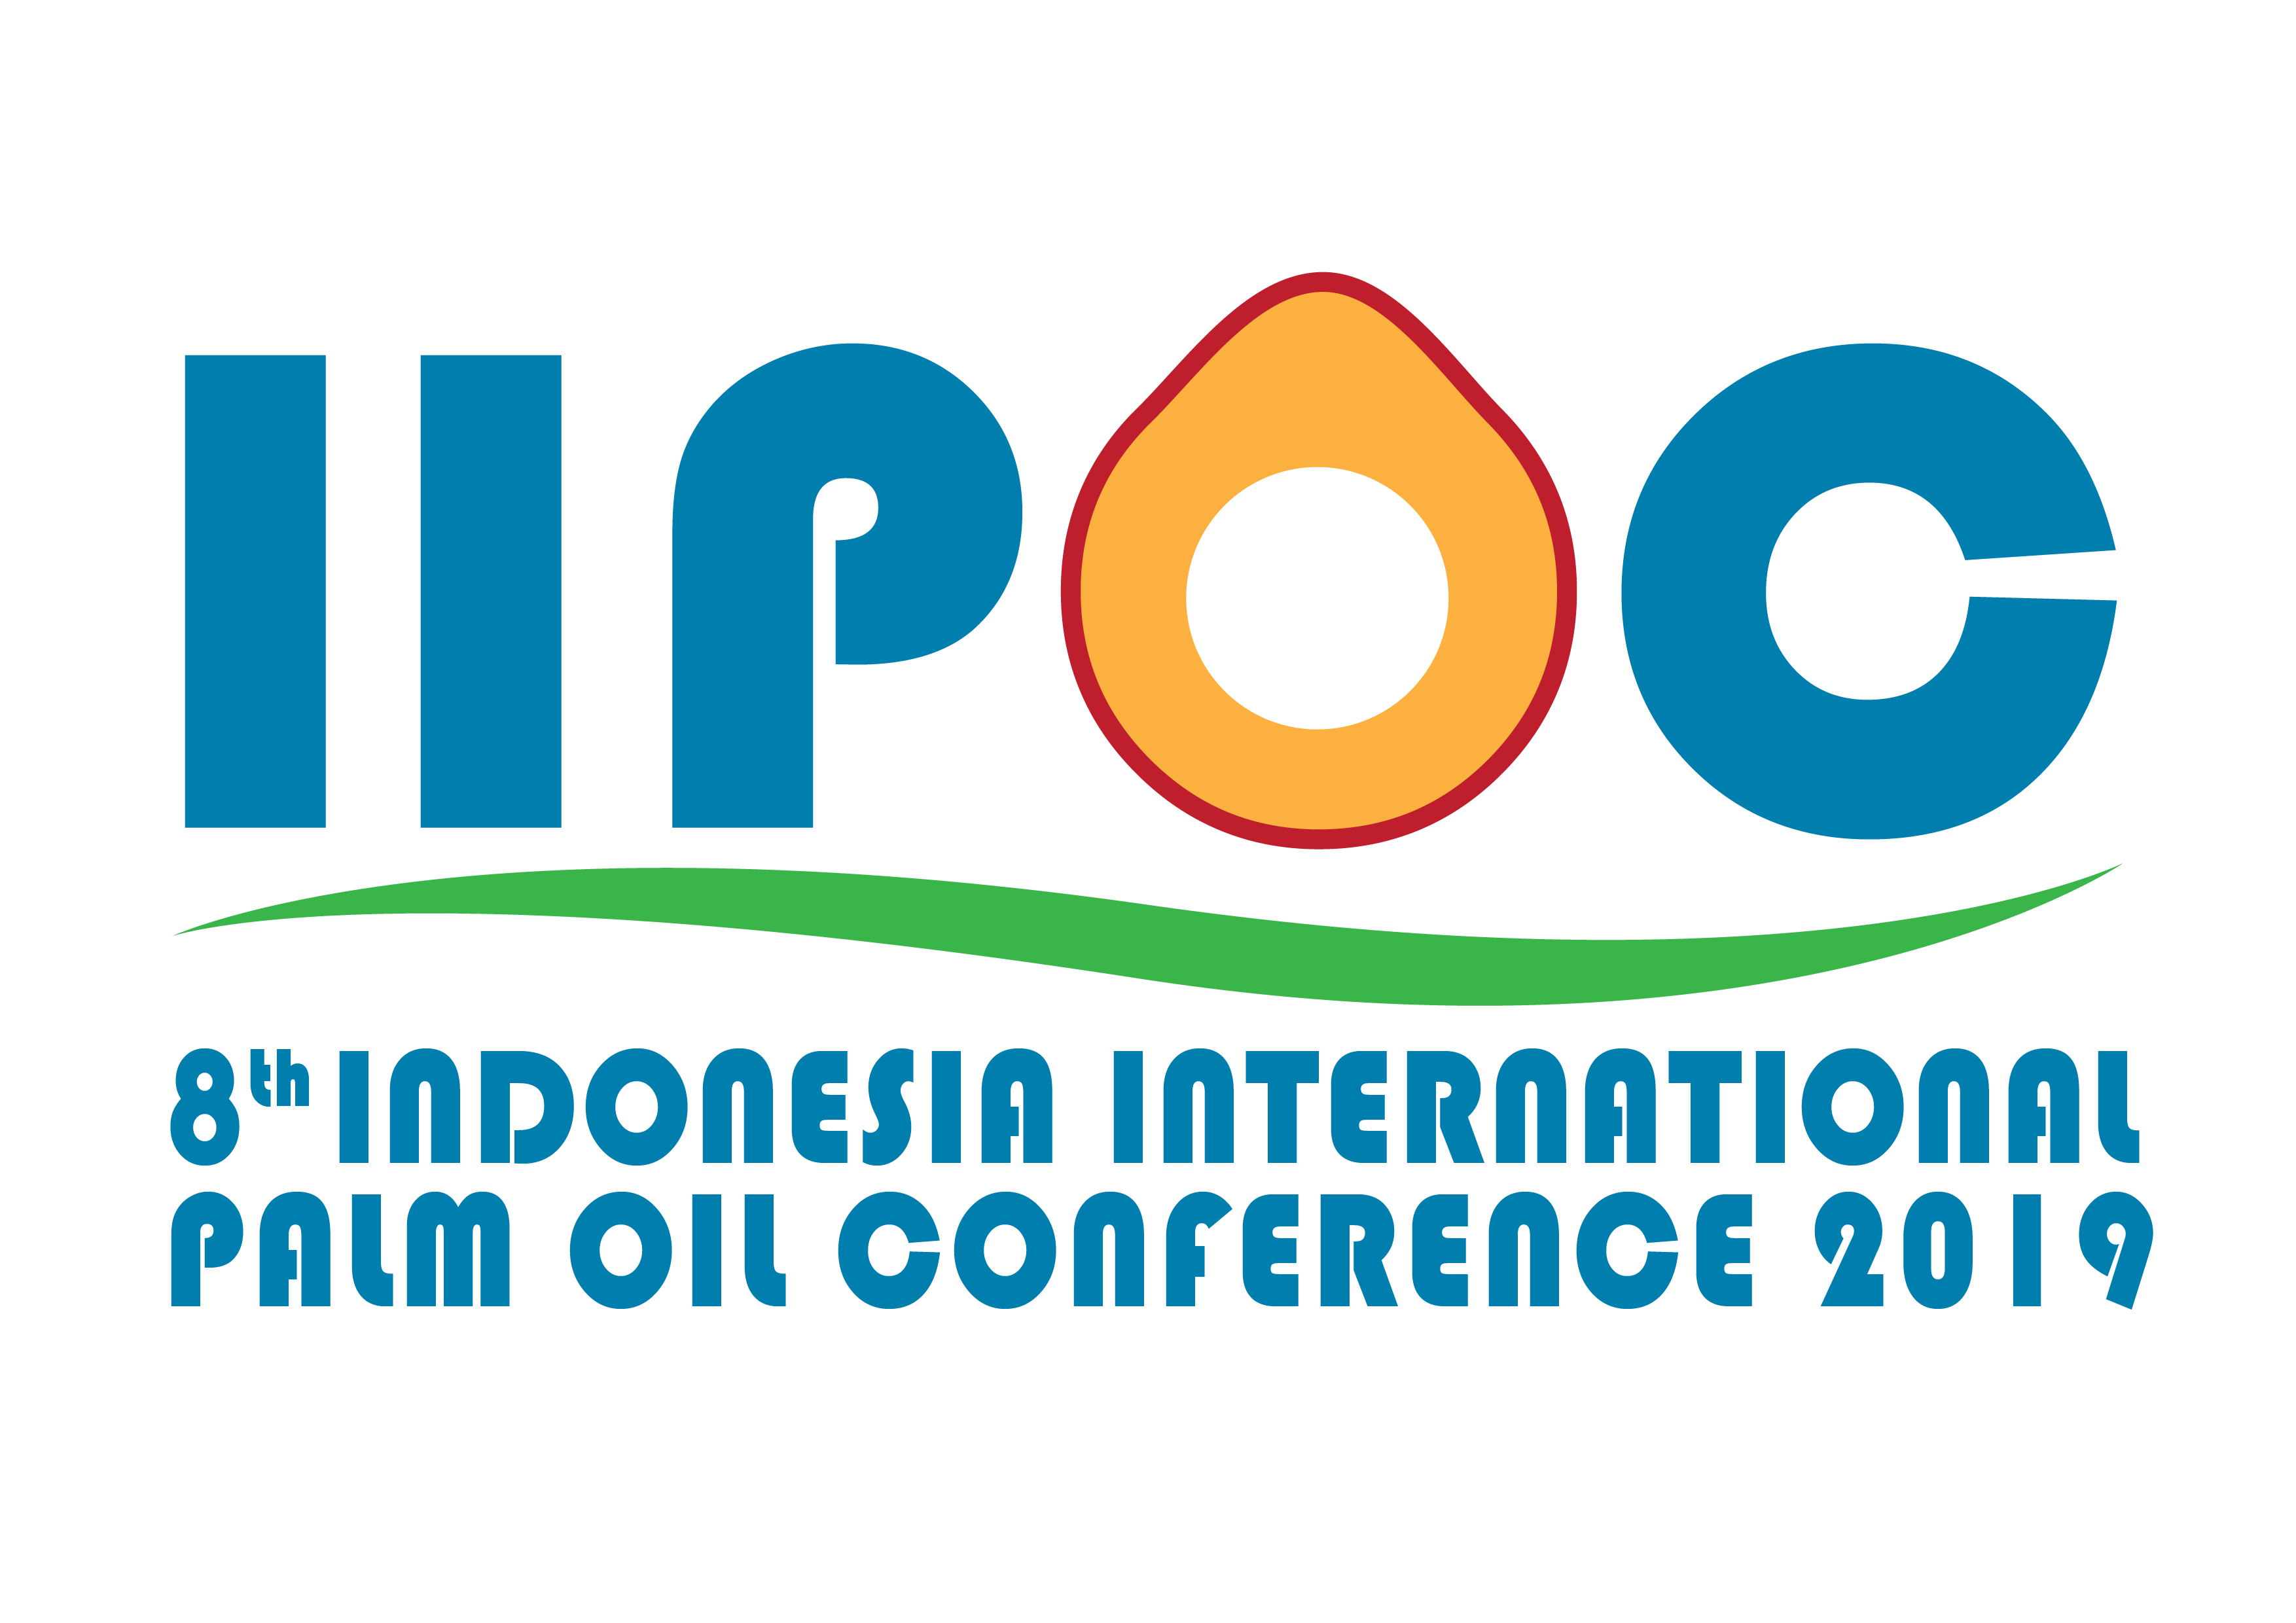 Indonesia International Palm OIl Conference 2019 - Palmex Indonesia 2019 